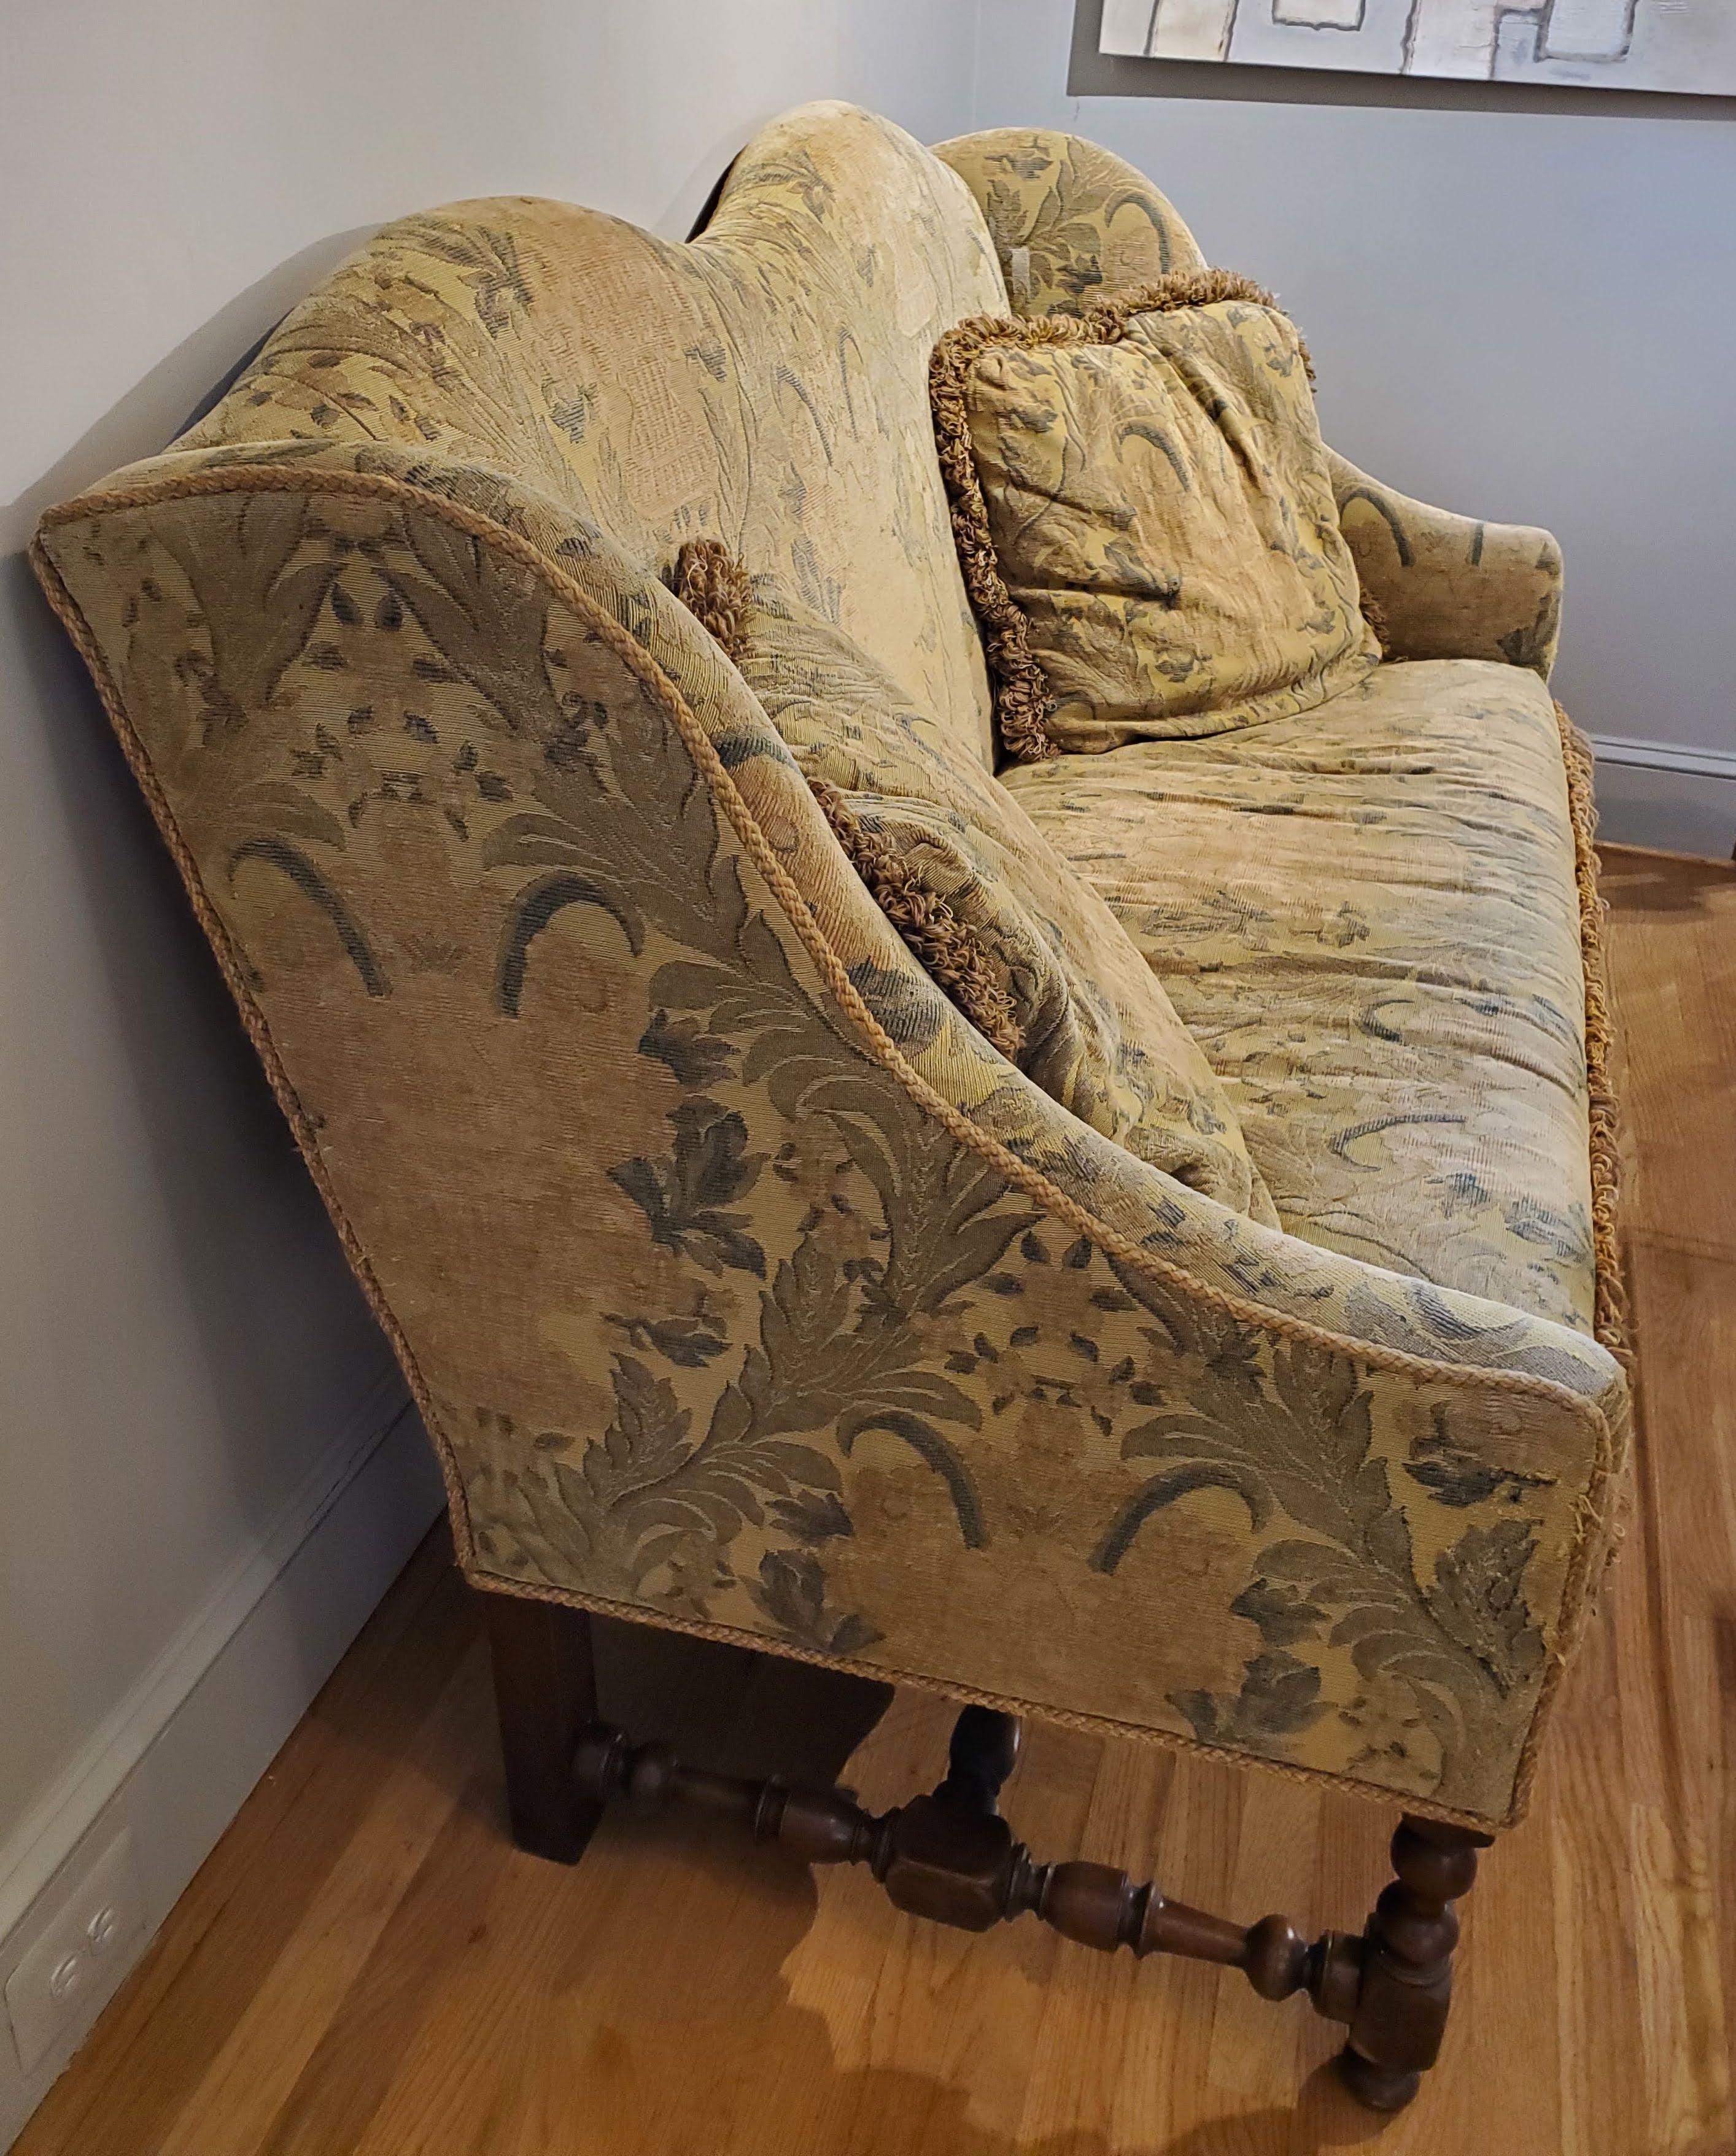 Beautiful 17th century style French Provincial upholstered walnut settee. Arched back with wing shaped ends over intricately turned legs and stretchers. Vintage embroidered fabric. Extremely comfortable. 
Measures: 44” H, 67” W, 30” D.